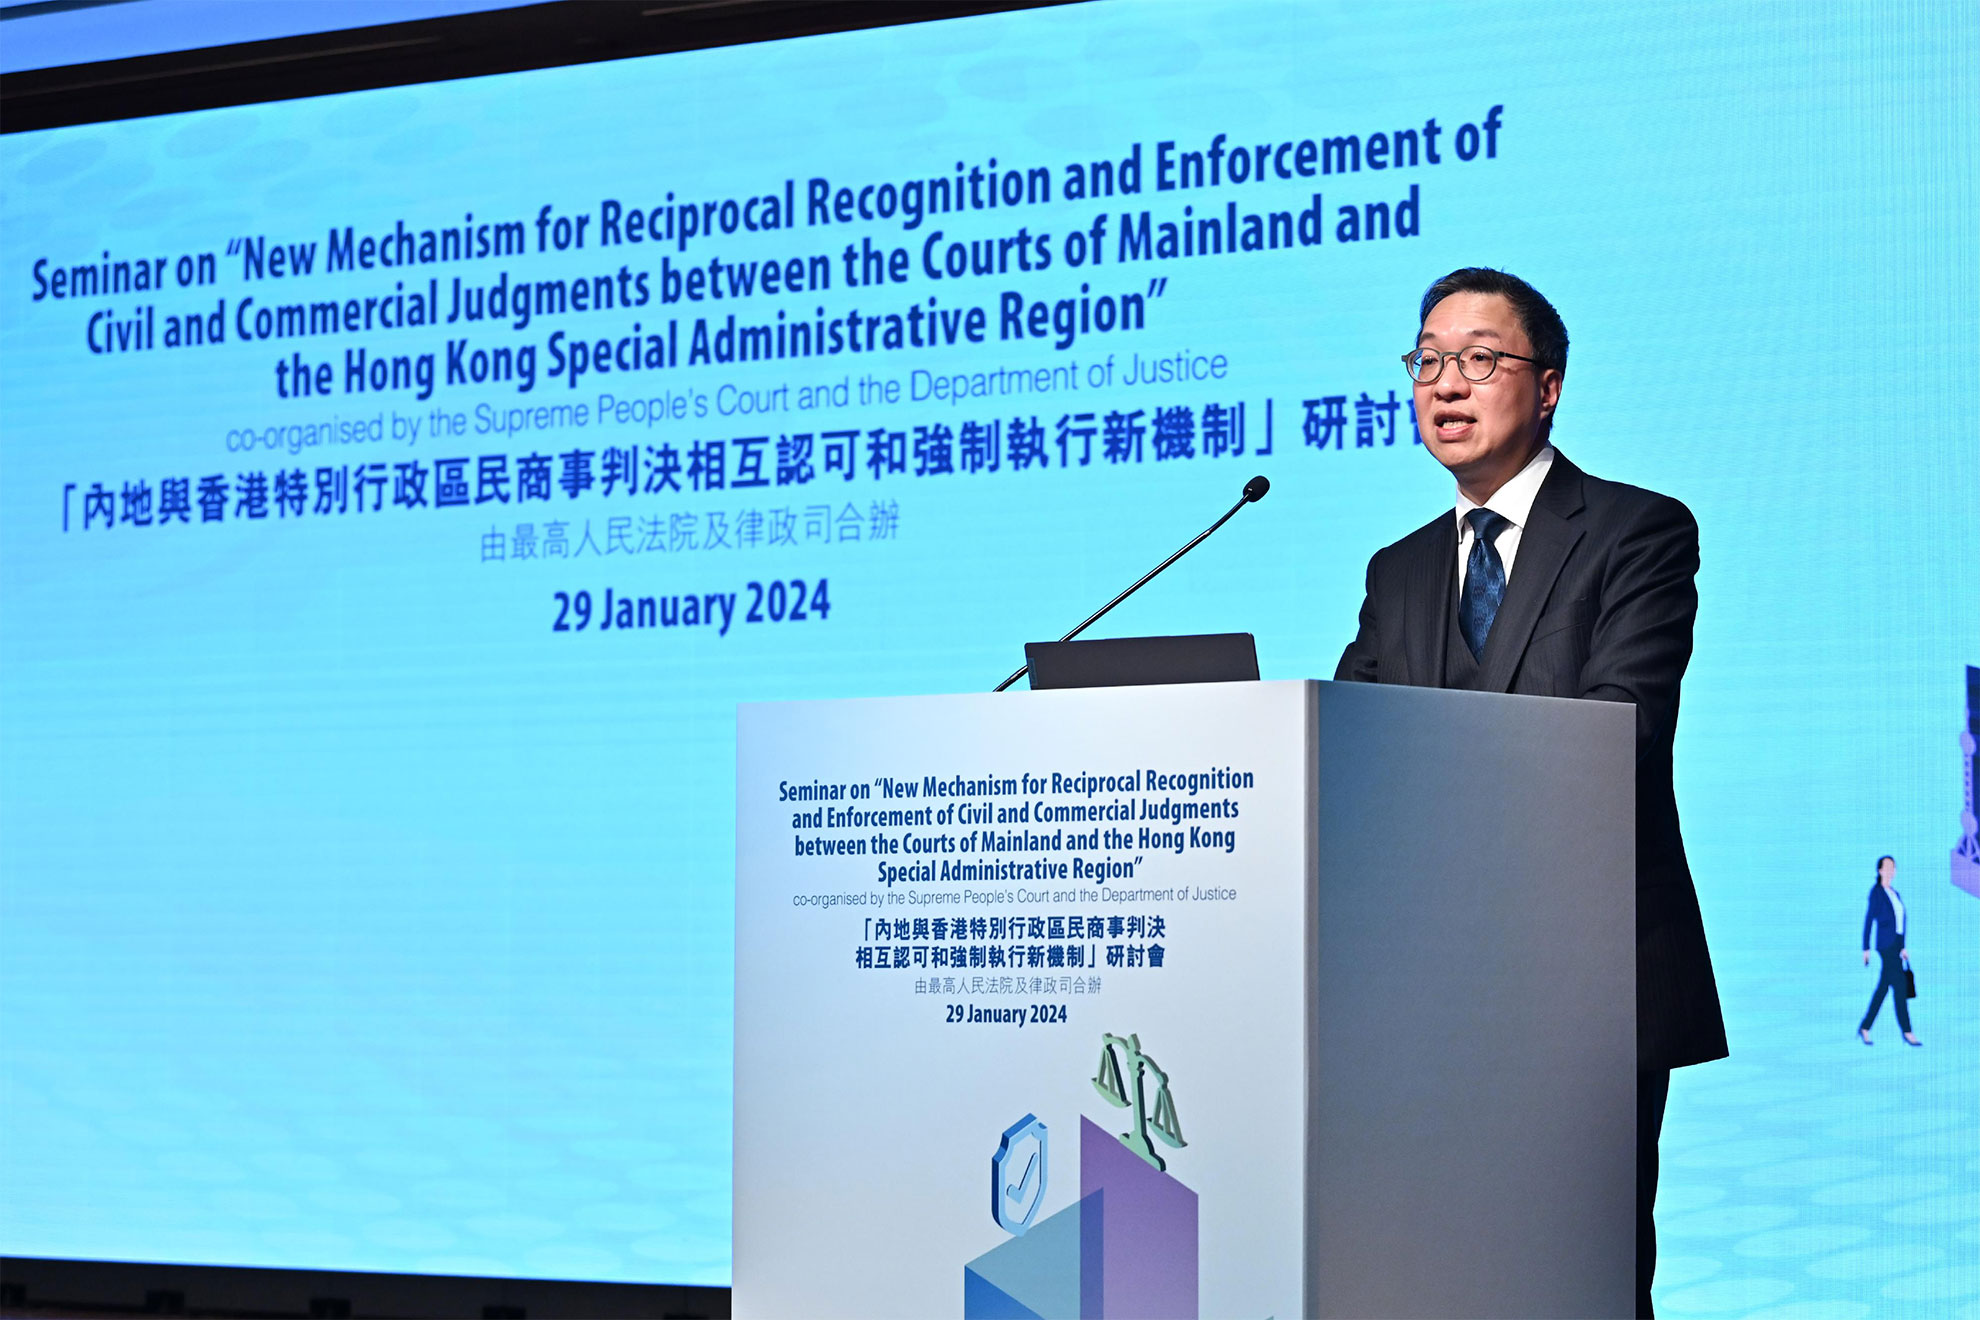 The seminar on "New Mechanism for Reciprocal Recognition and Enforcement of Civil and Commercial Judgments between the Courts of Mainland and the Hong Kong Special Administrative Region" co-organised by the Supreme People's Court and the Department of Justice was held today (January 29). Photo shows the Secretary for Justice, Mr Paul Lam, SC, delivering his opening remarks at the seminar.